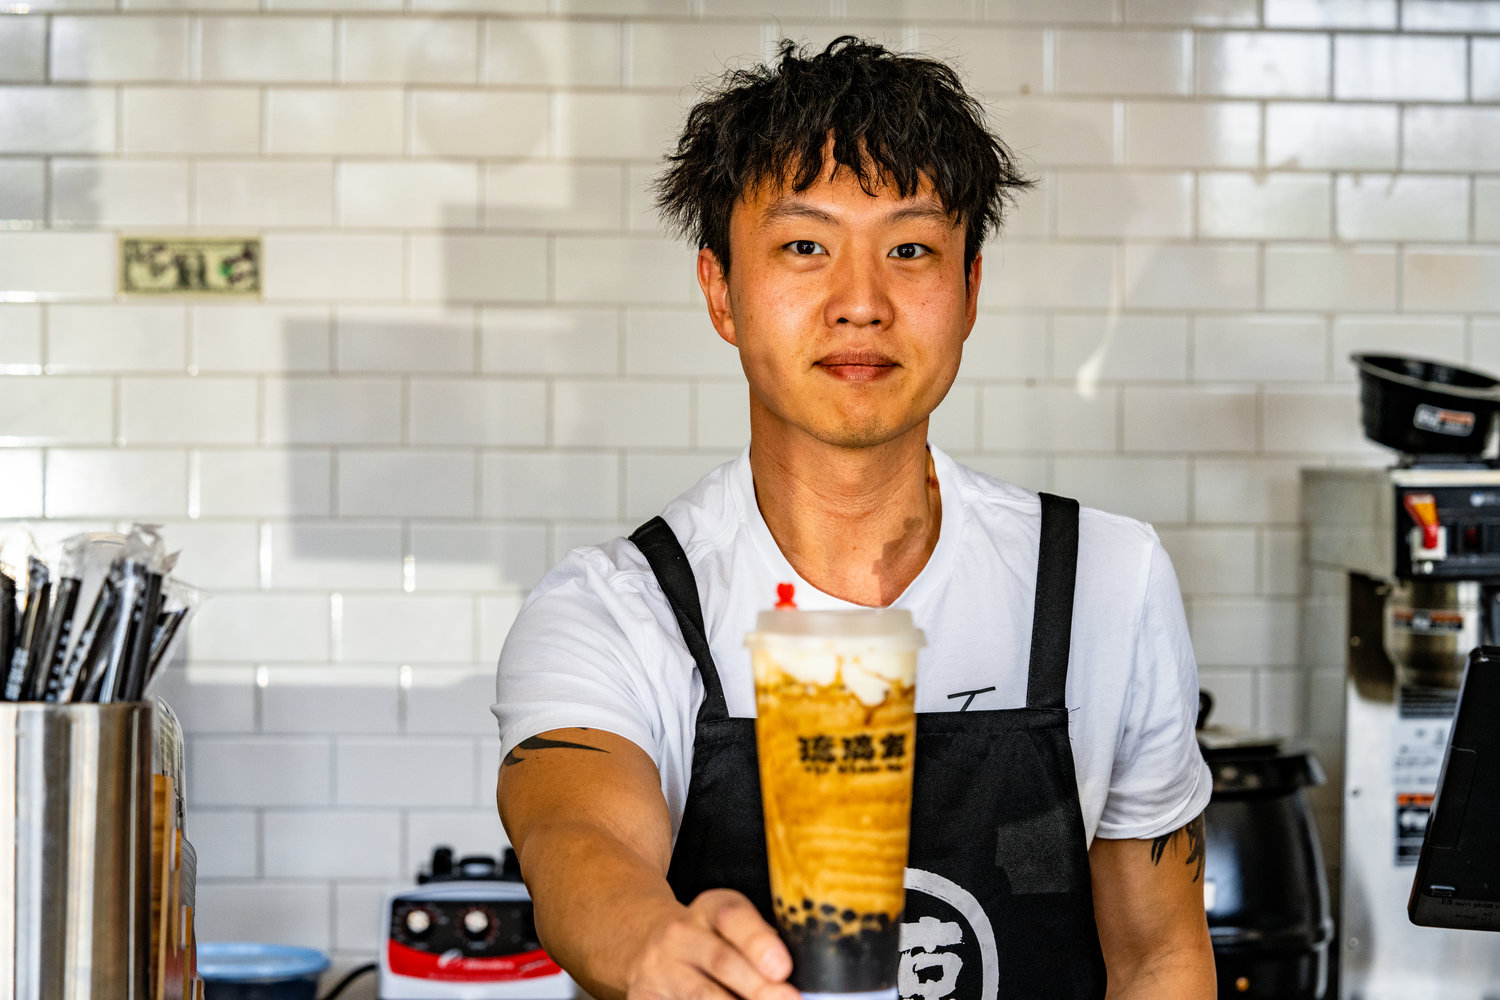 The global phenomenon, bubble tea, is now available locally thanks to proprietor, Allen Zhang, who envisioned a new market for the Taiwanese concoction.